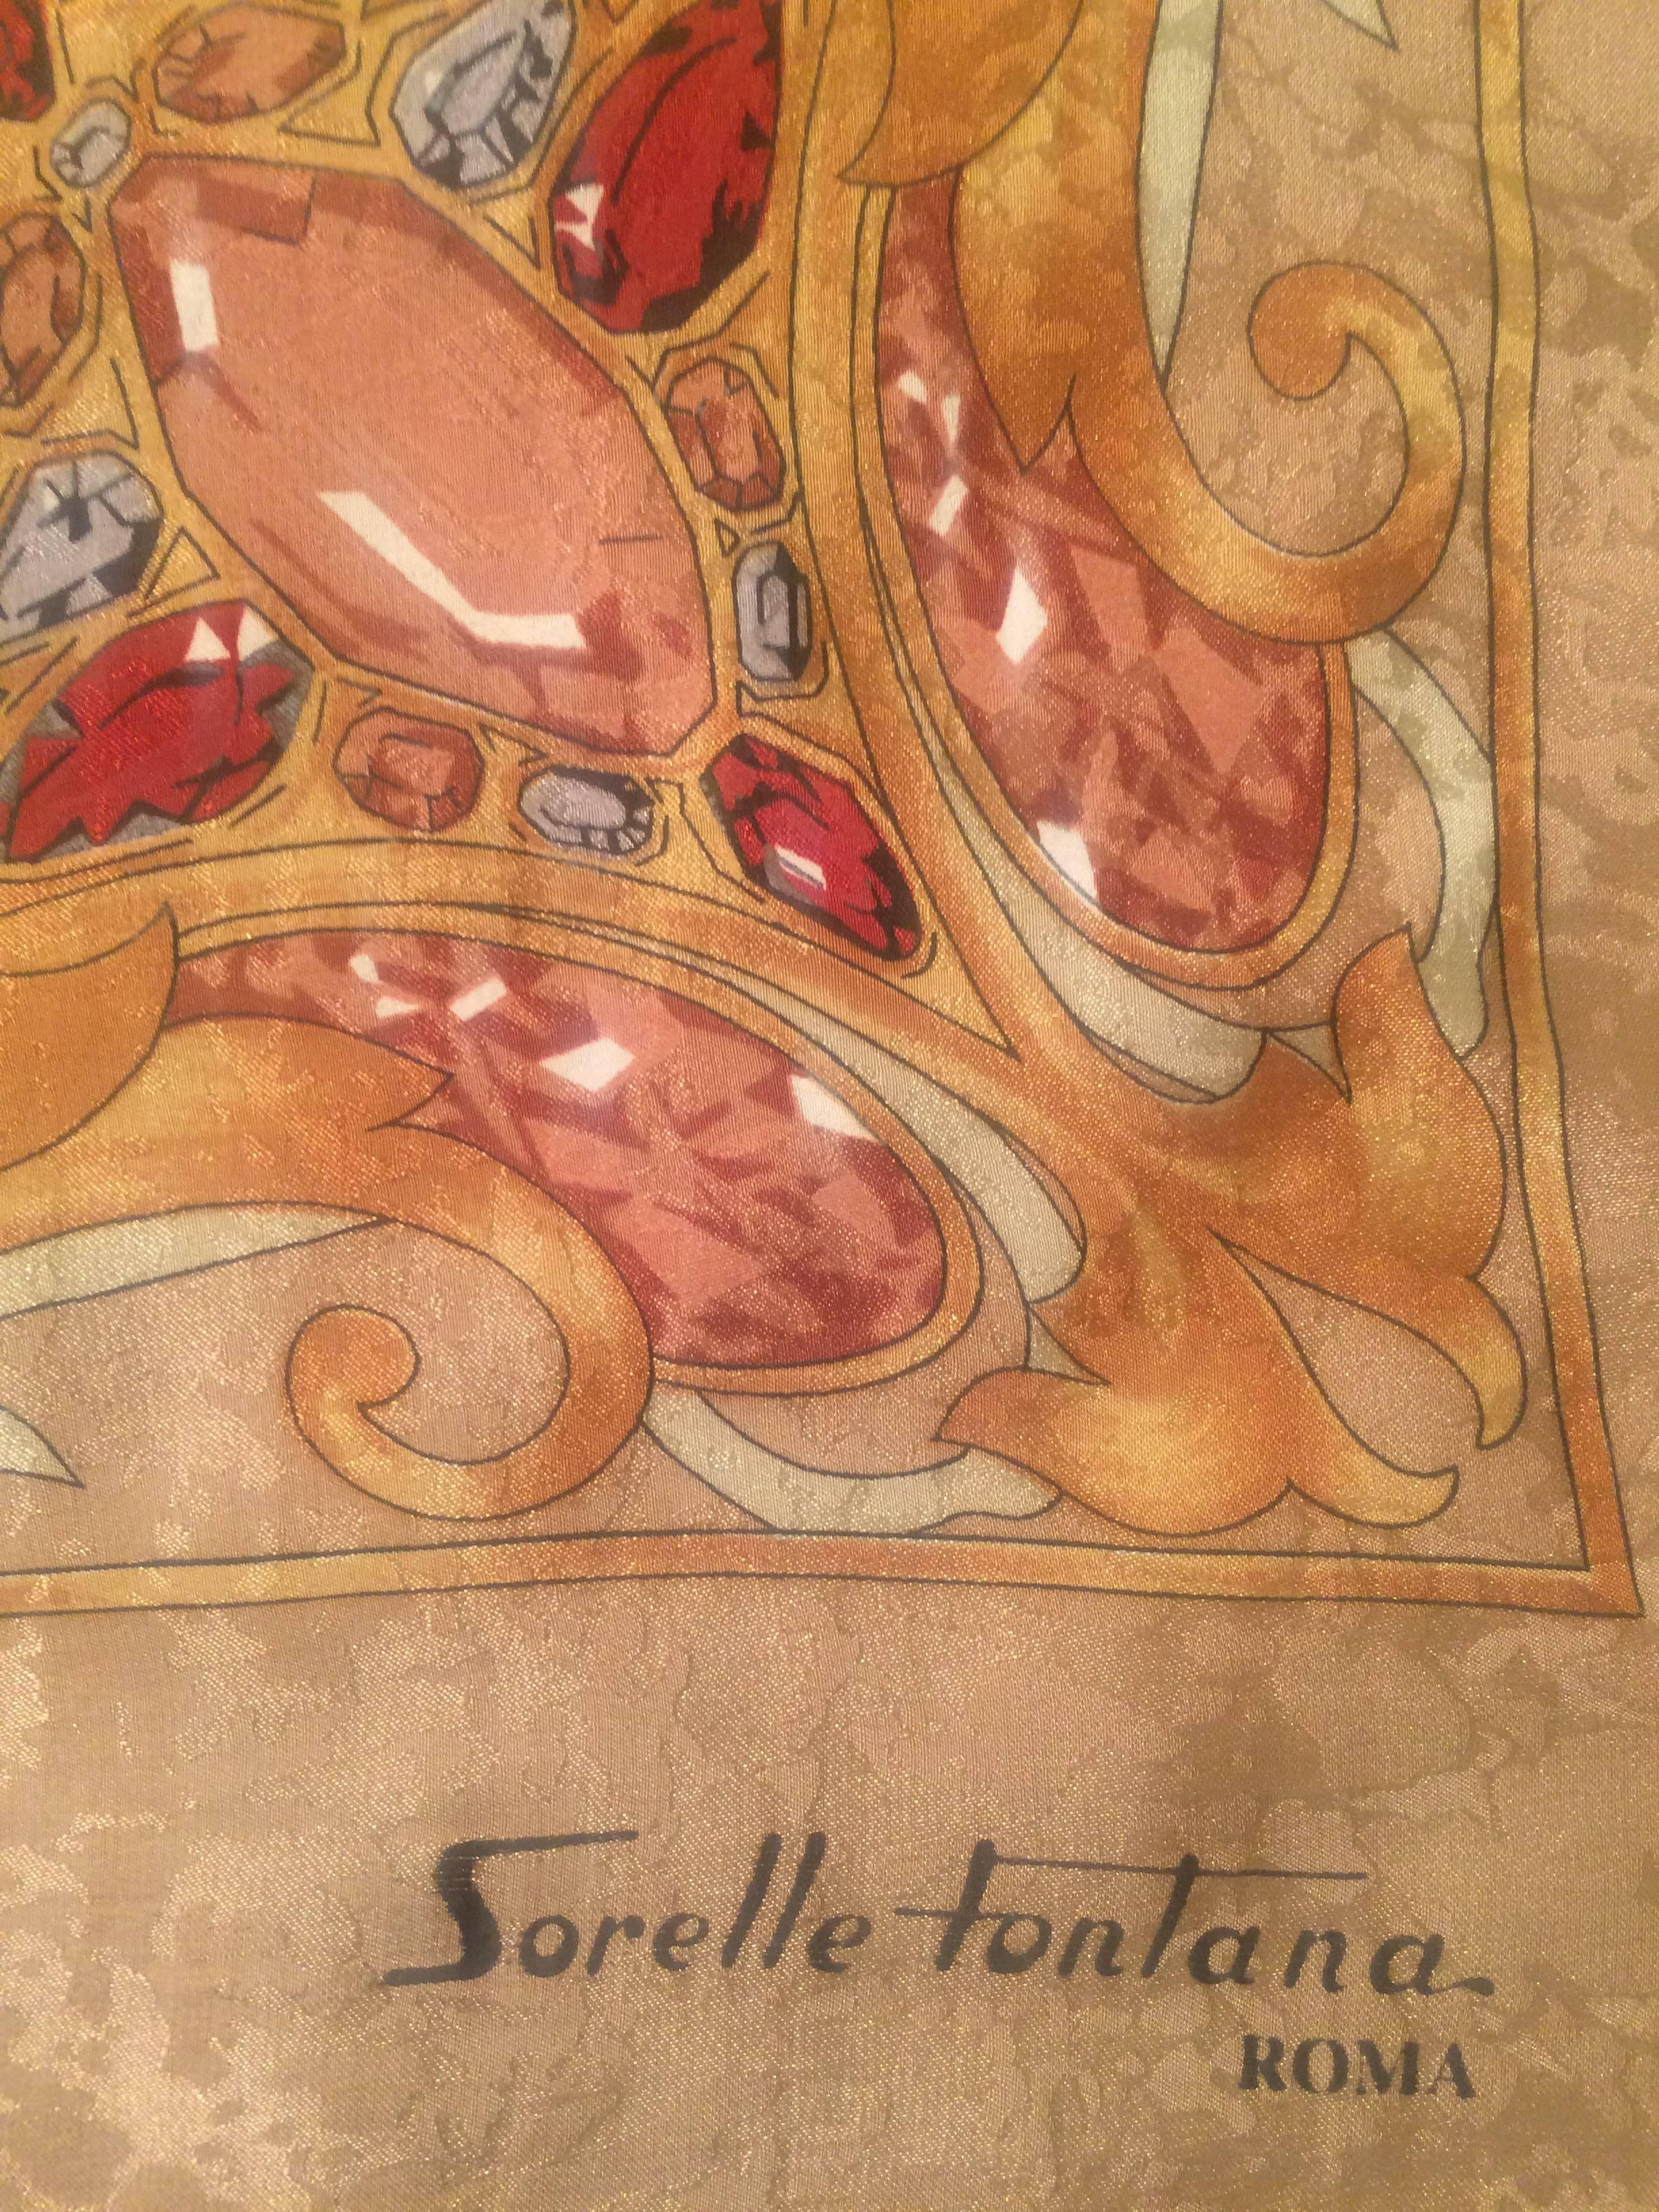 Sorelle Fontana gold silk scarf with leopard and jewel prints throughout. Hand rolled edges. Signed 'Sorelle Fontana, Roma' at corner.

100% silk.

Made in Italy.

Approximately 34" x 34".

Excellent condition, no flaws to note.